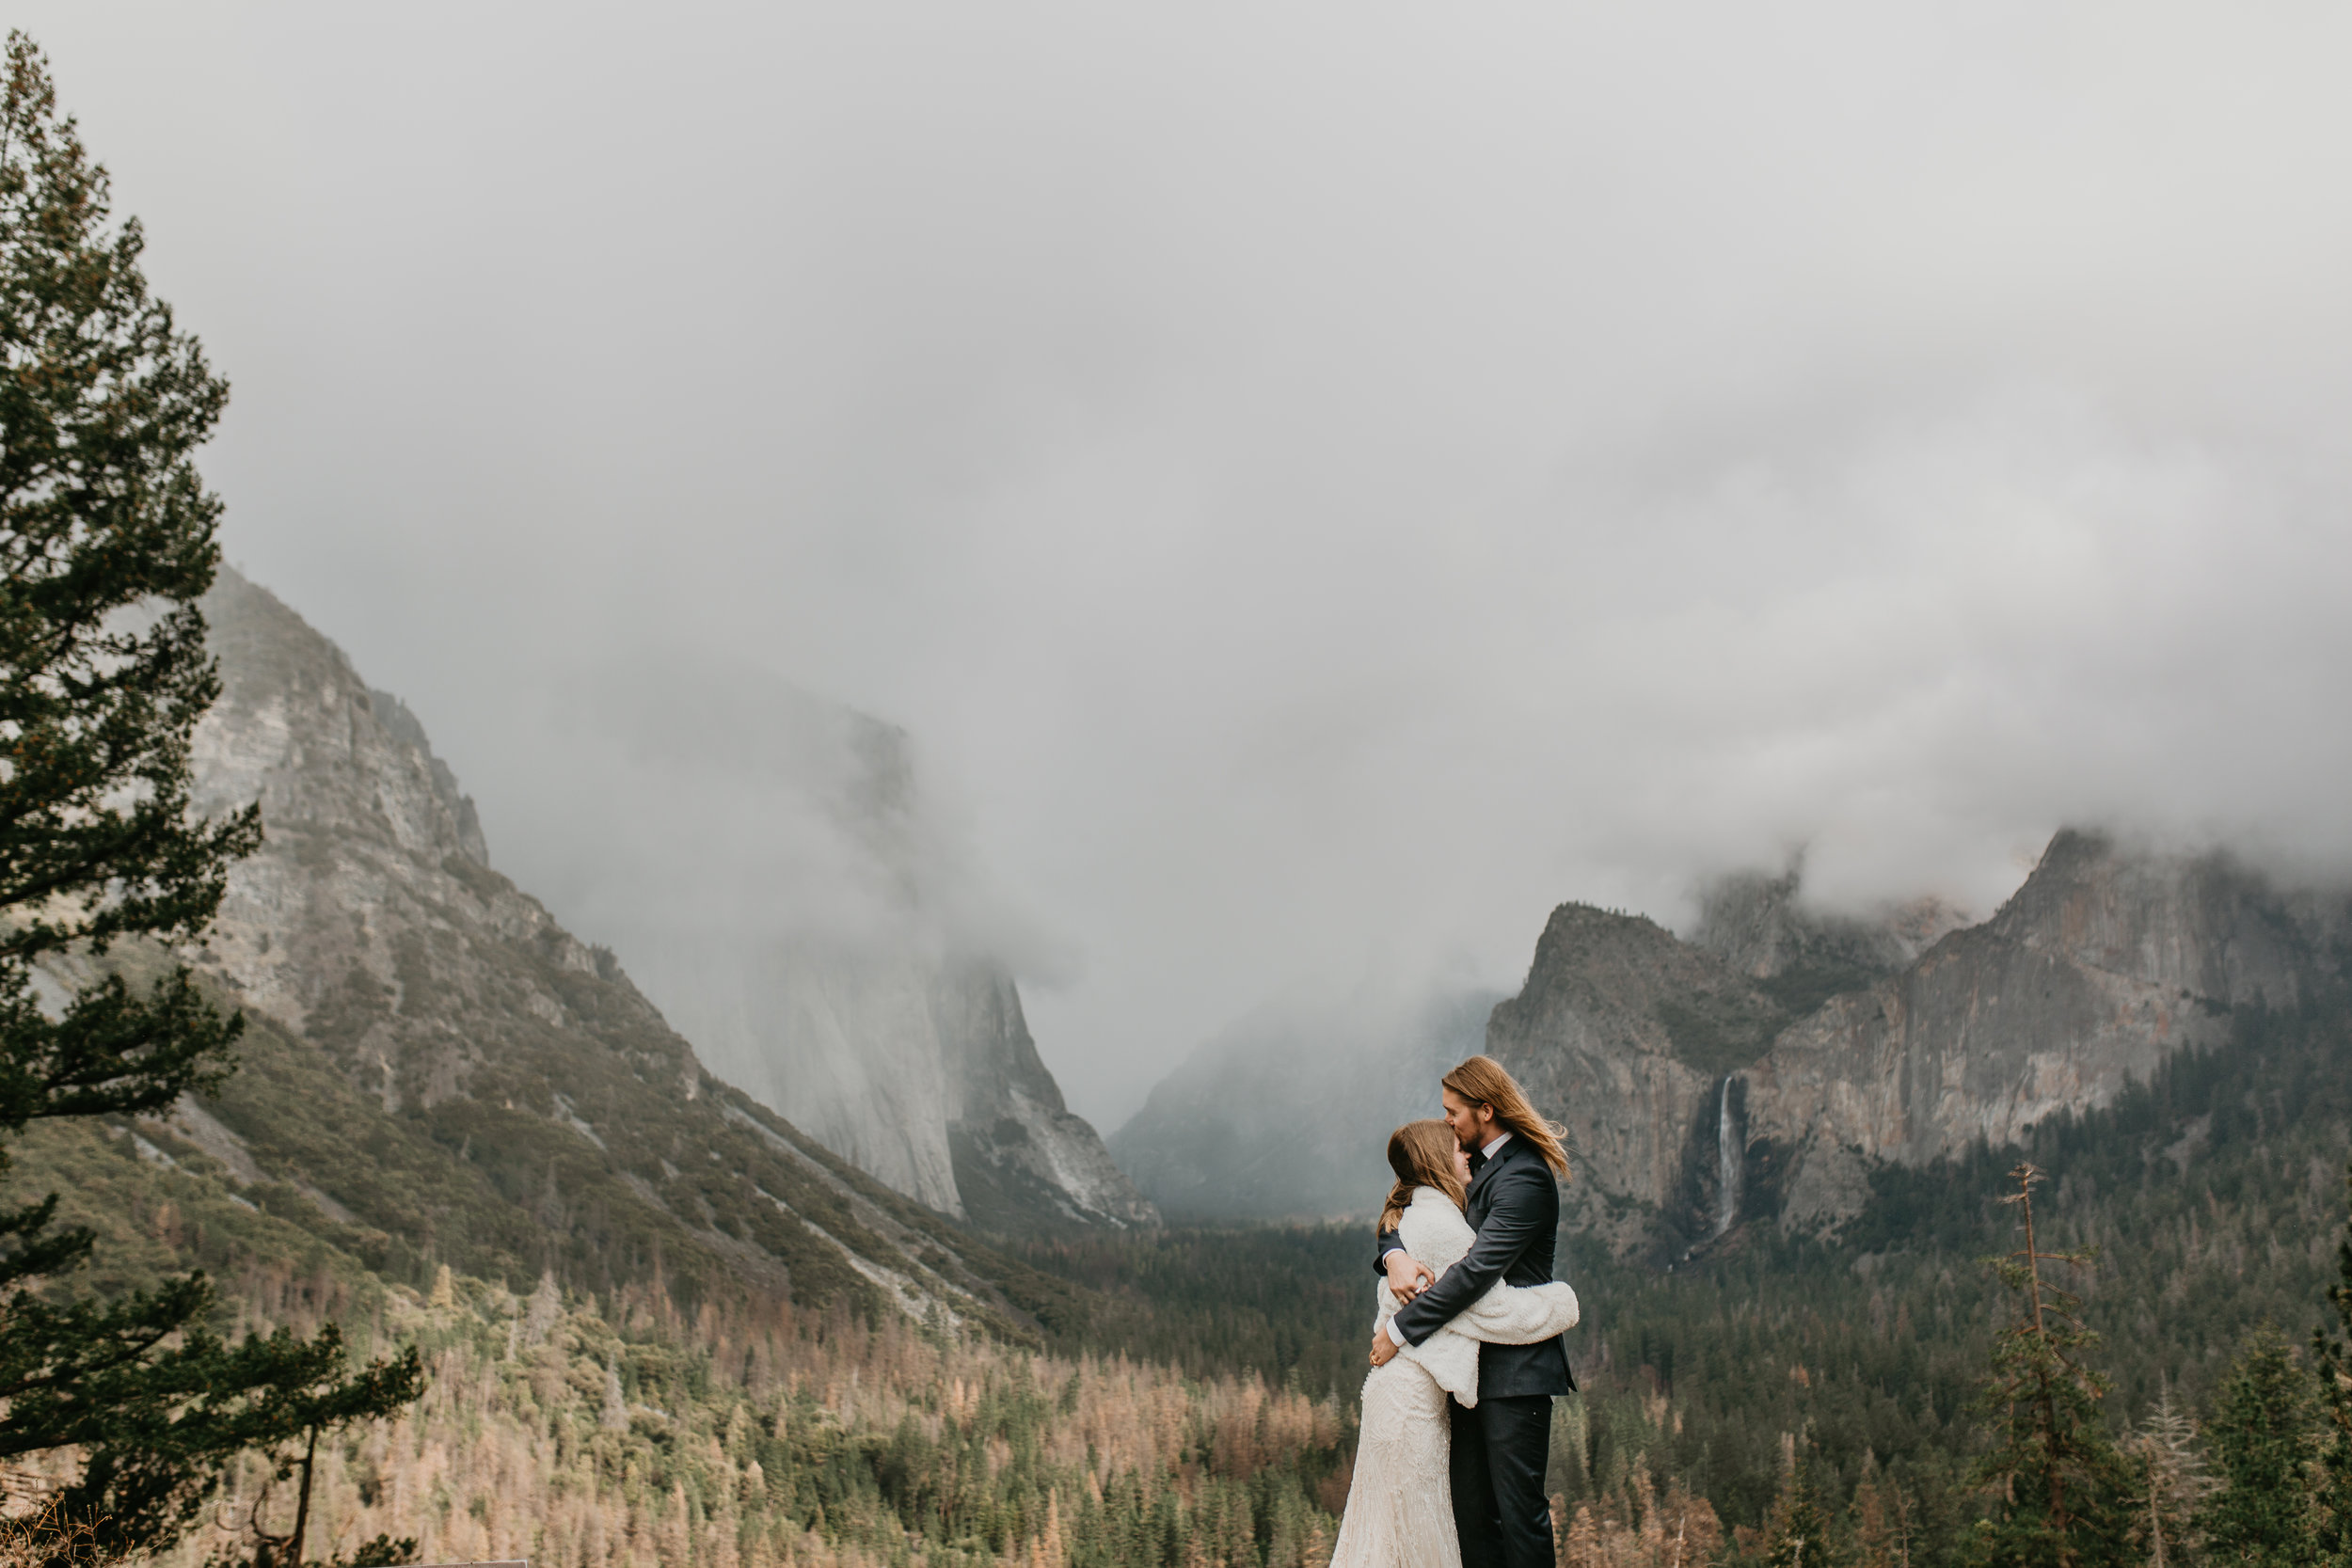 nicole-daacke-photography-yousemite-national-park-elopement-photographer-winter-cloud-moody-elope-inspiration-yosemite-valley-tunnel-view-winter-cloud-fog-weather-wedding-photos-13.jpg